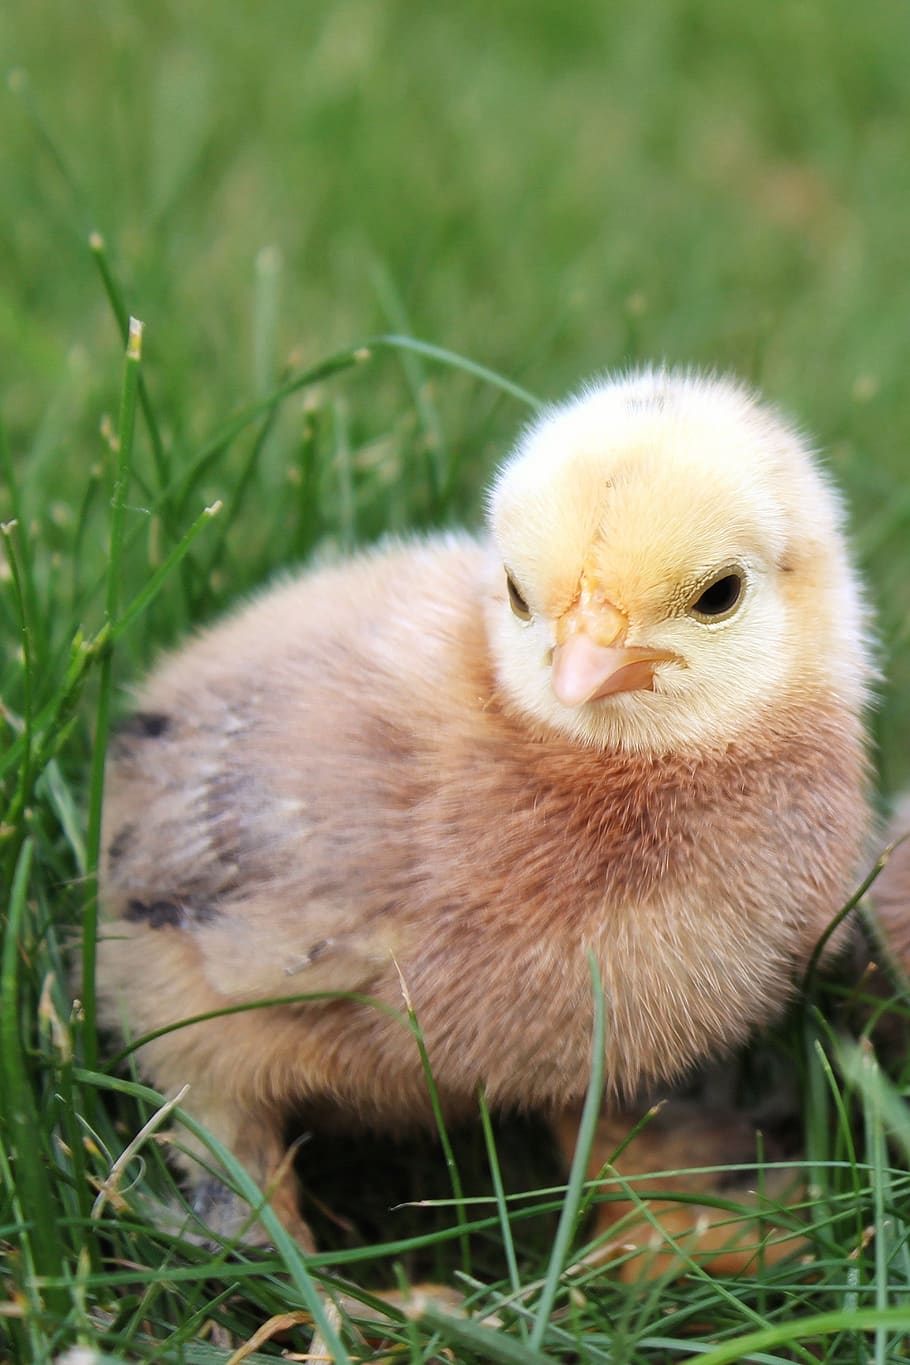 chicks, chicken, animal, bird, cute sweet, young, easter, agriculture, nutrition, egg